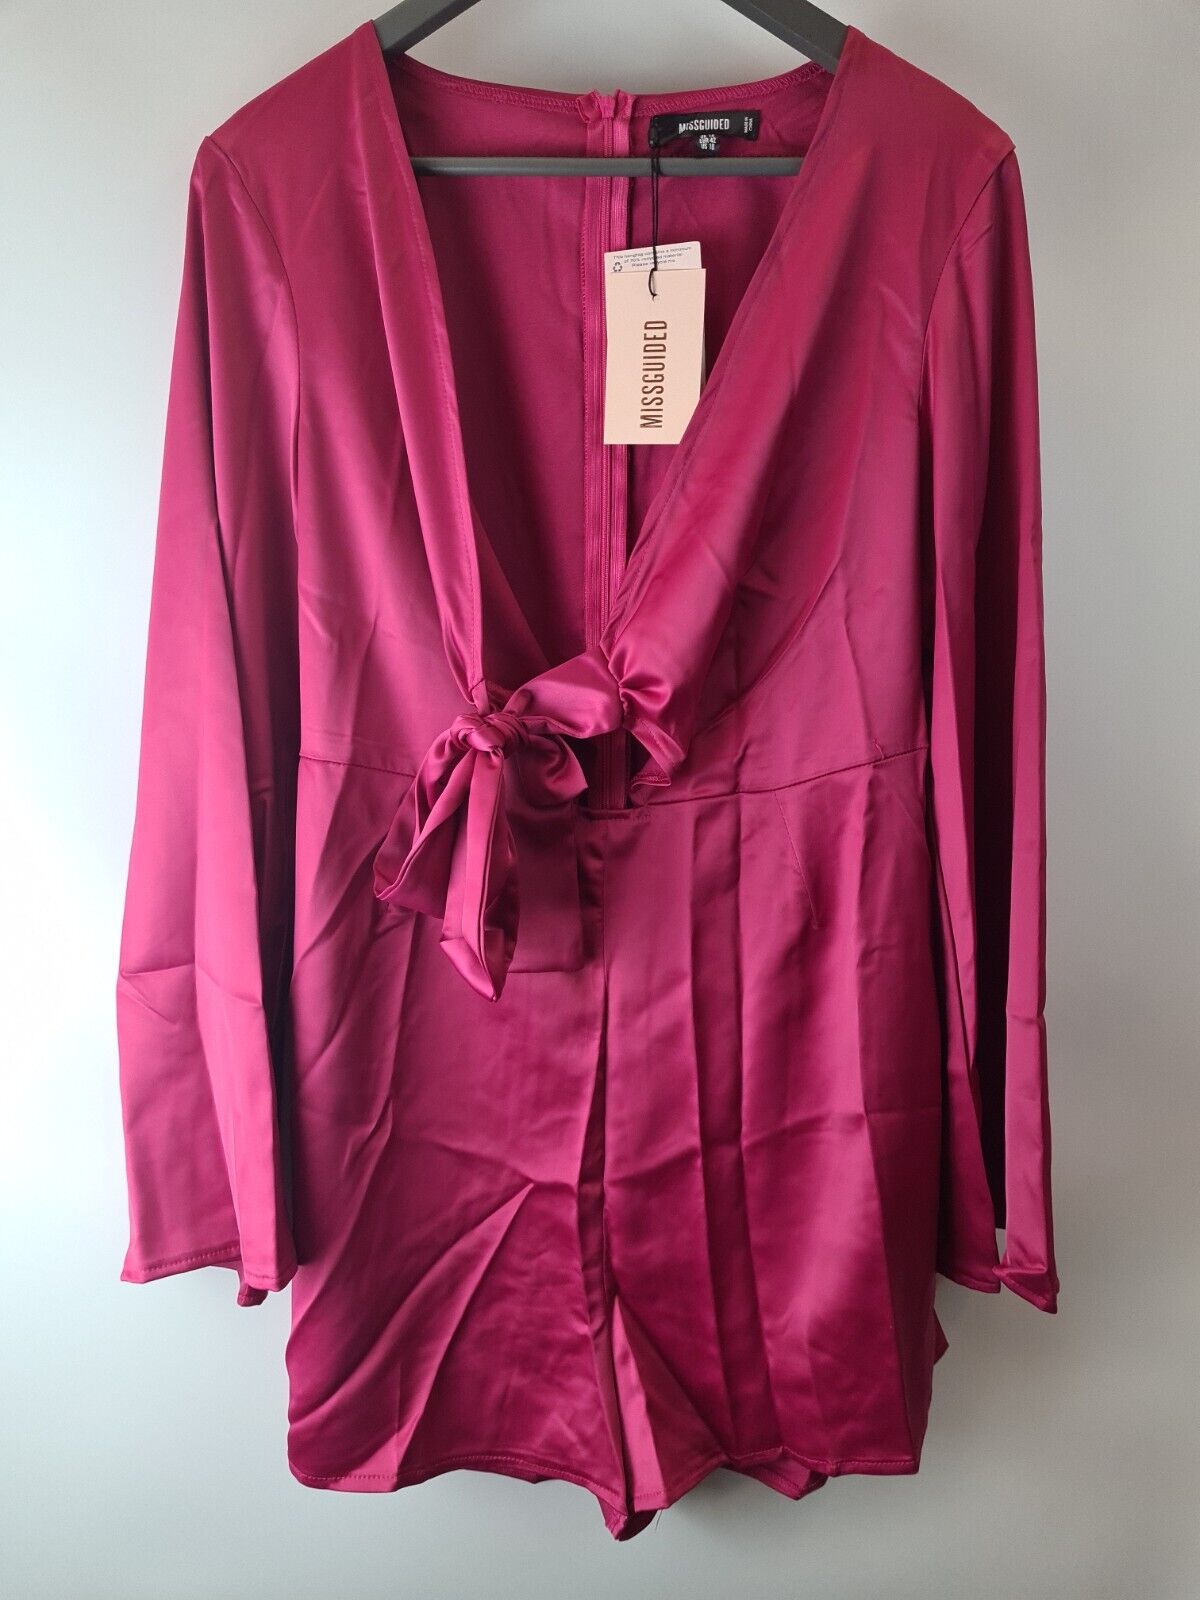 Missguided Satin Tie Front Flare Sleeves Hot Pink Playsuit Size 12 **** V36